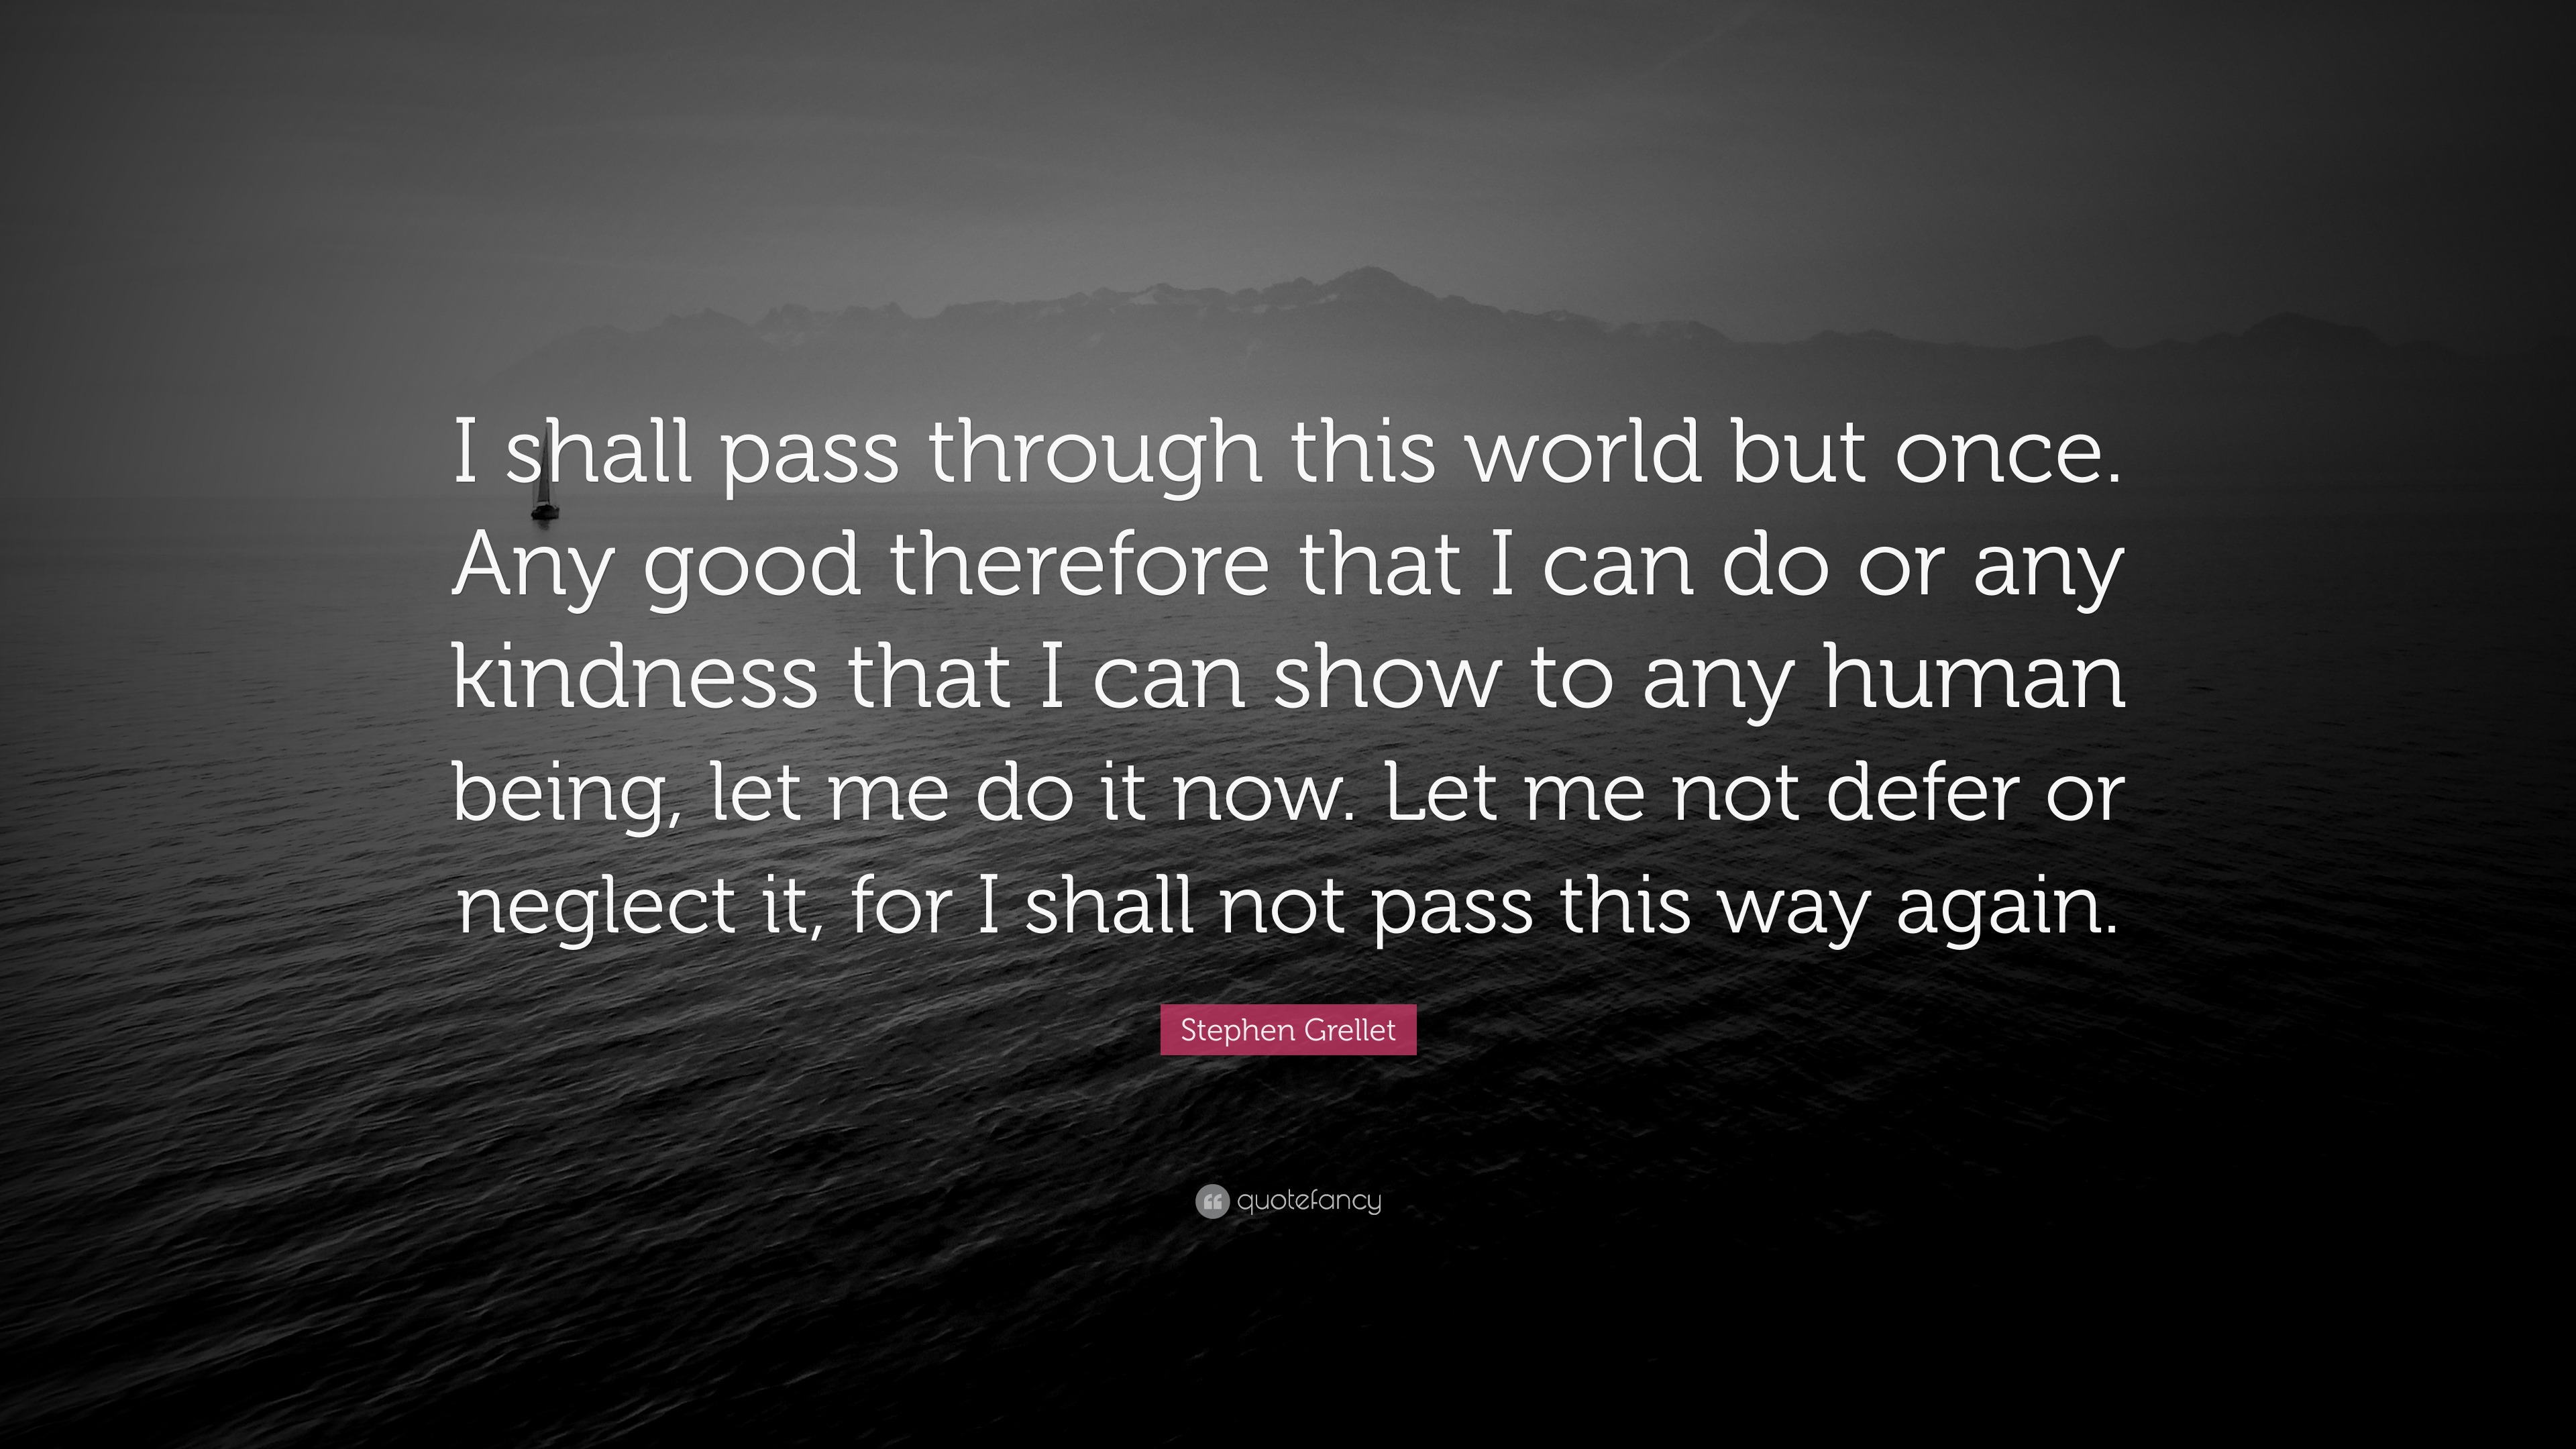 I Can Do This For Hours Stephen Grellet Quote: “I shall pass through this world but once. Any